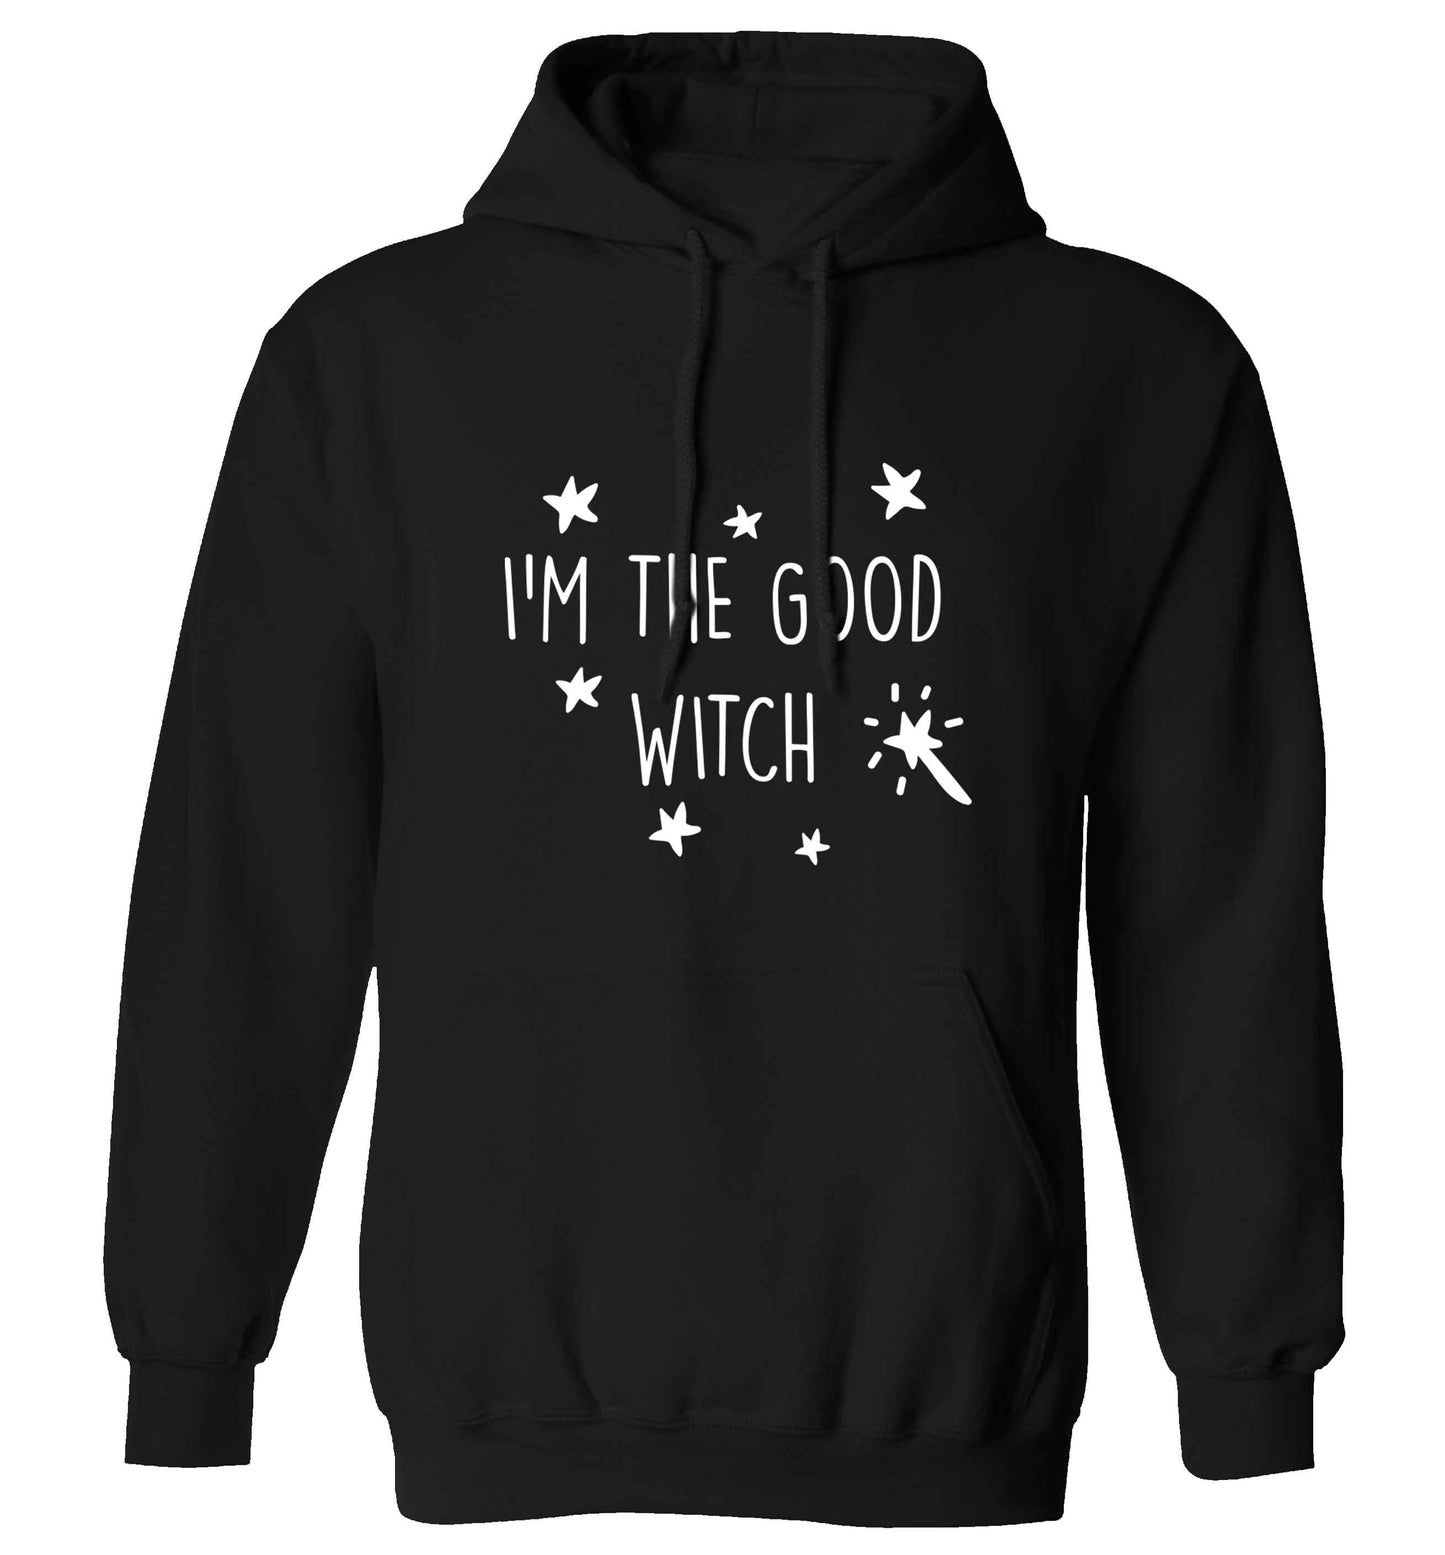 Good witch adults unisex black hoodie 2XL